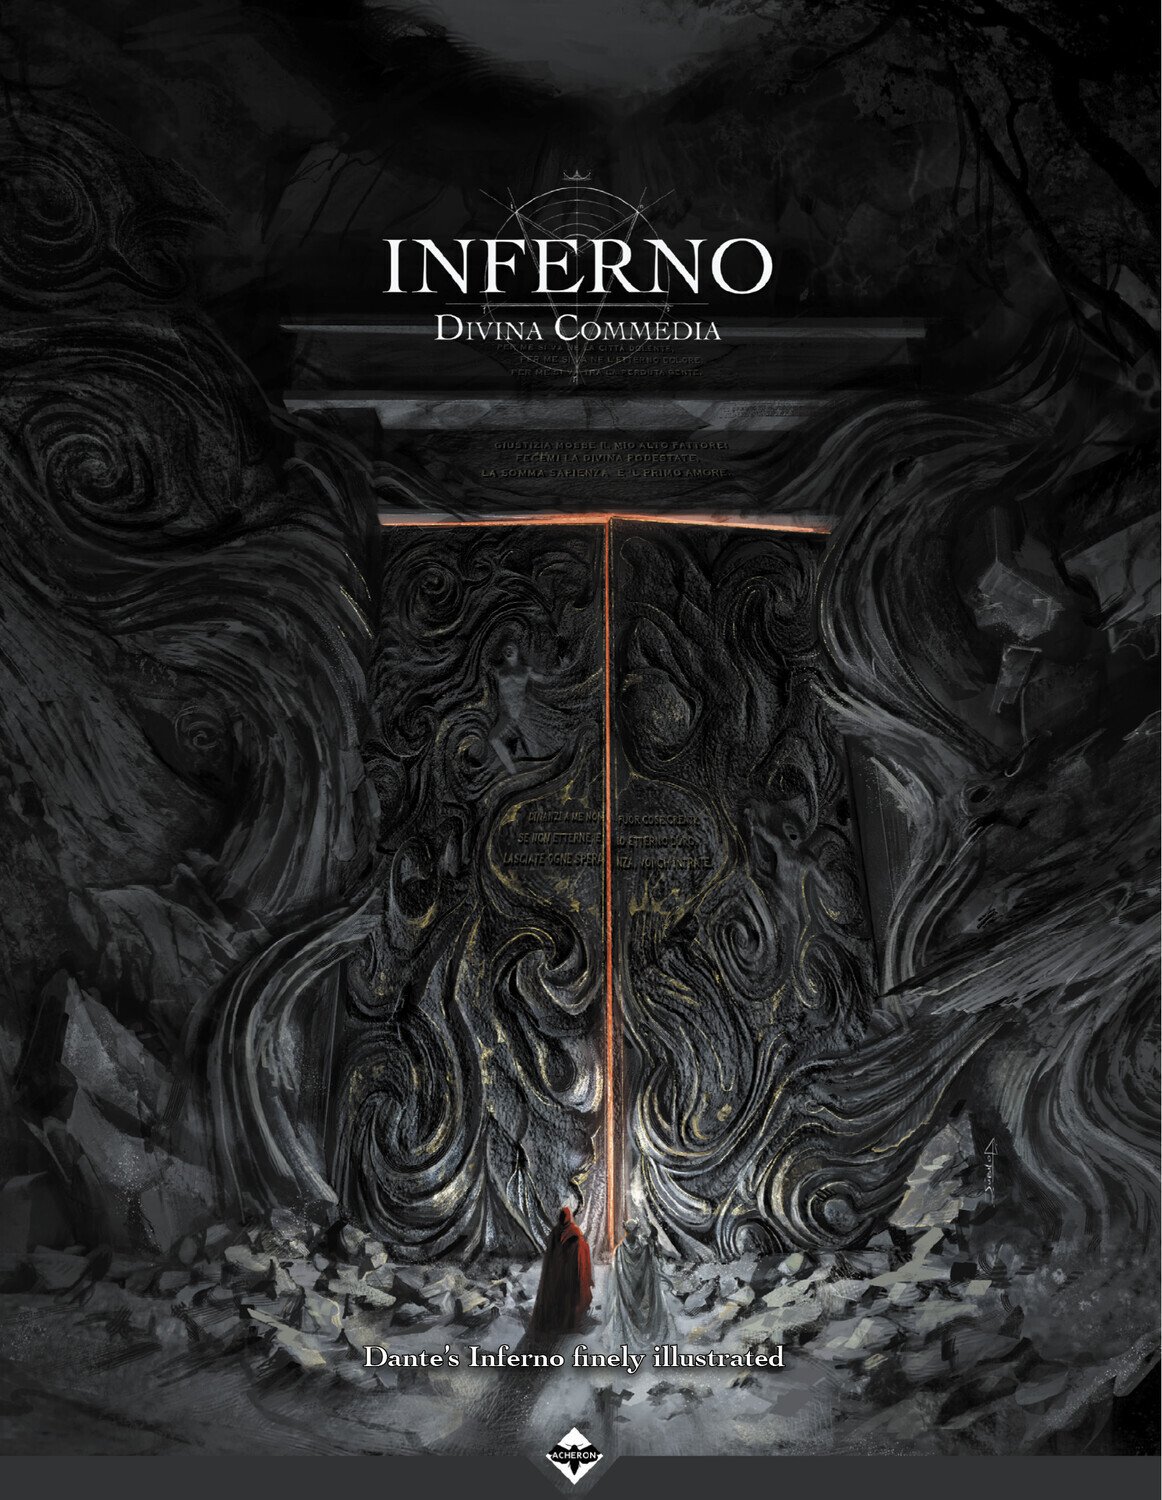 Inferno: Dante's Guide to Hell: unknown author: 9788832198867: :  Books